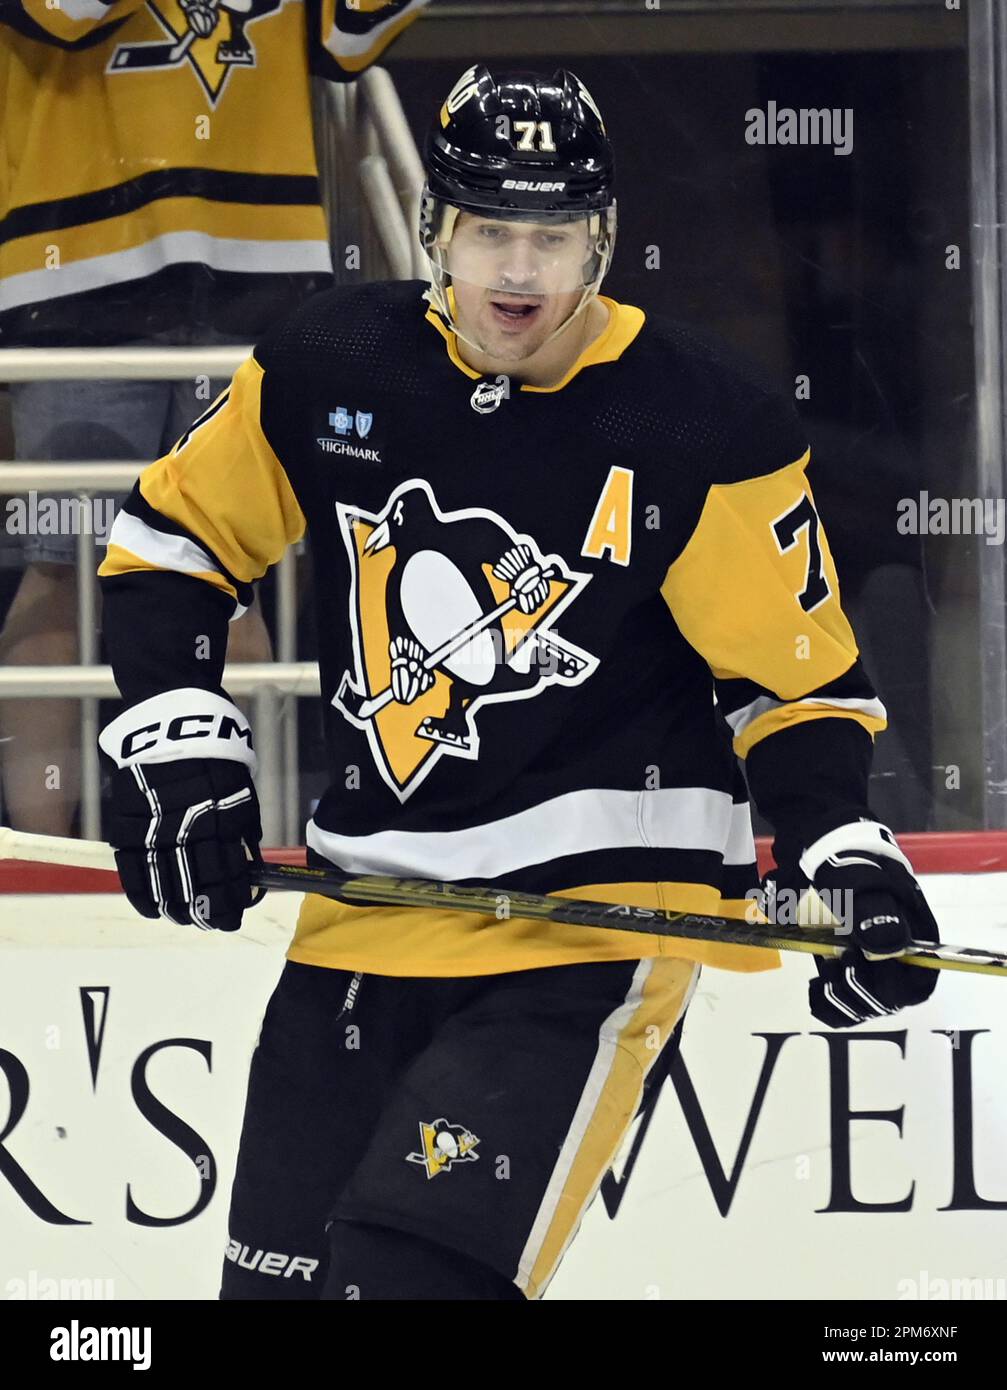 Evgeni Malkin of the Pittsburgh Penguins unveils the Penguins 2011 News  Photo - Getty Images